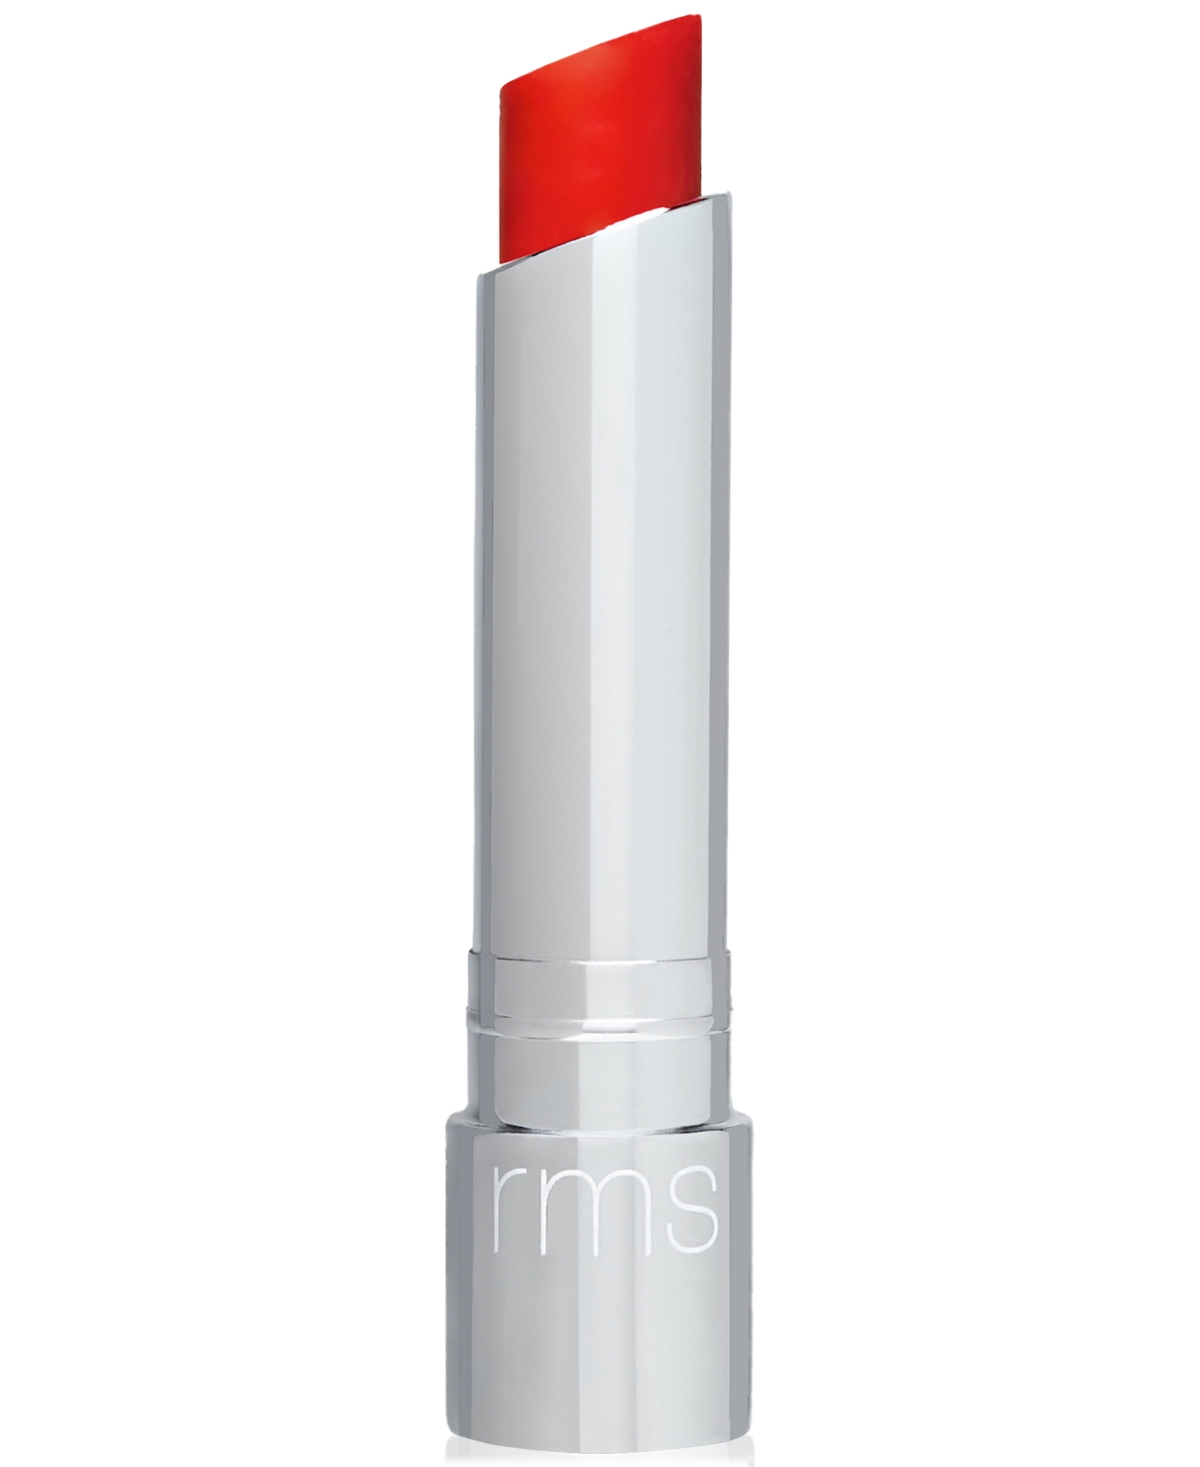 Rms Beauty Tinted Daily Lip Balm In Crimson Lane